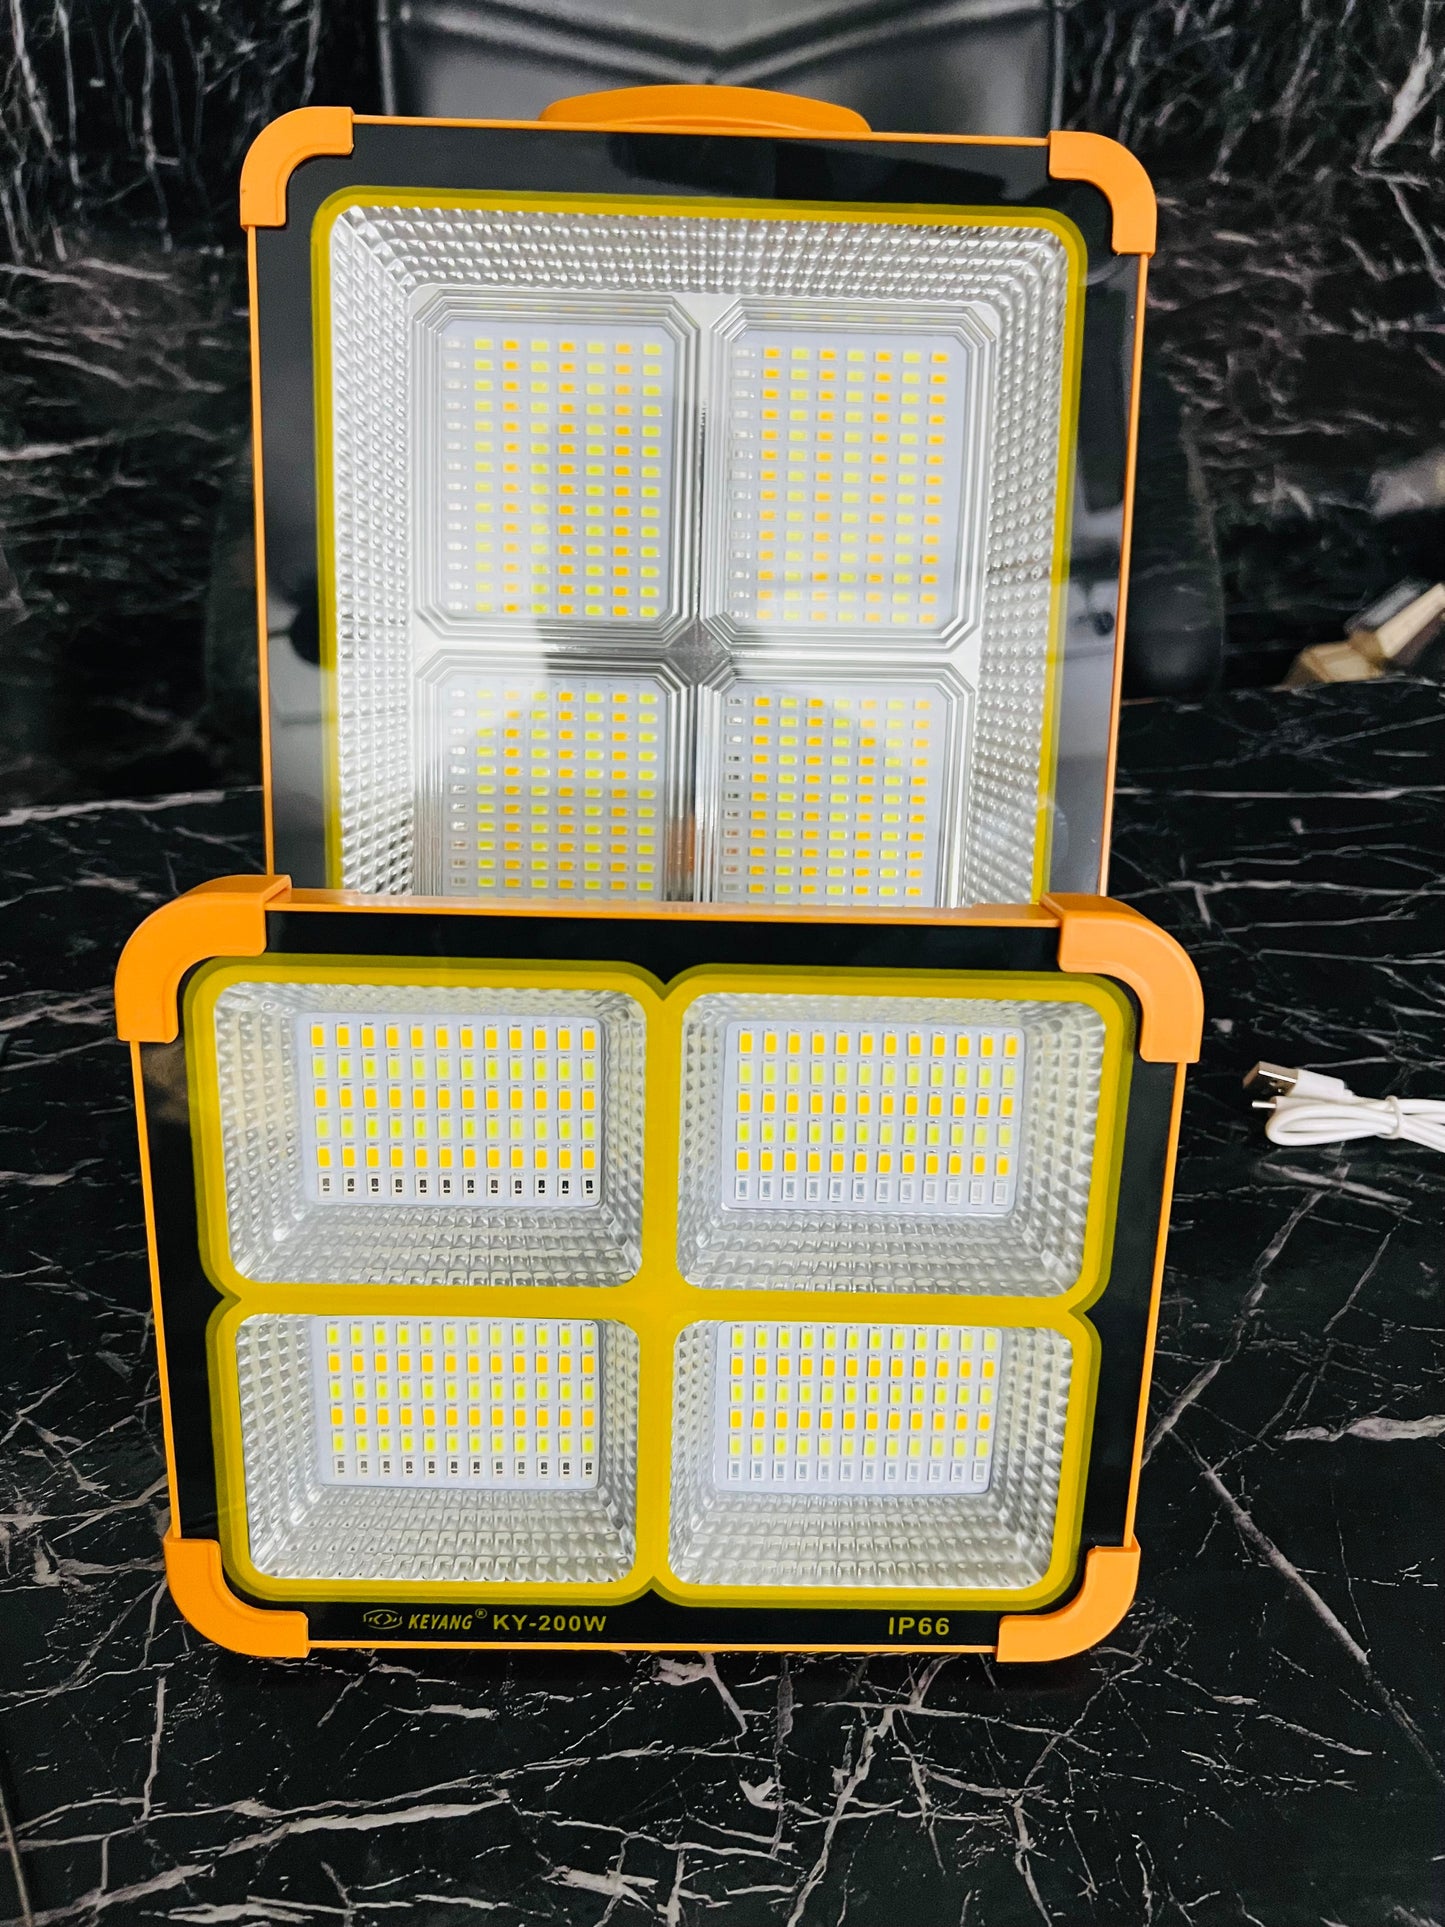 MKY Solar Flood Lights 5 in 1 Modes White / Warm White / Natural White / Dim White / Red-Blue Flash 8 hours backup Waterproof ip66